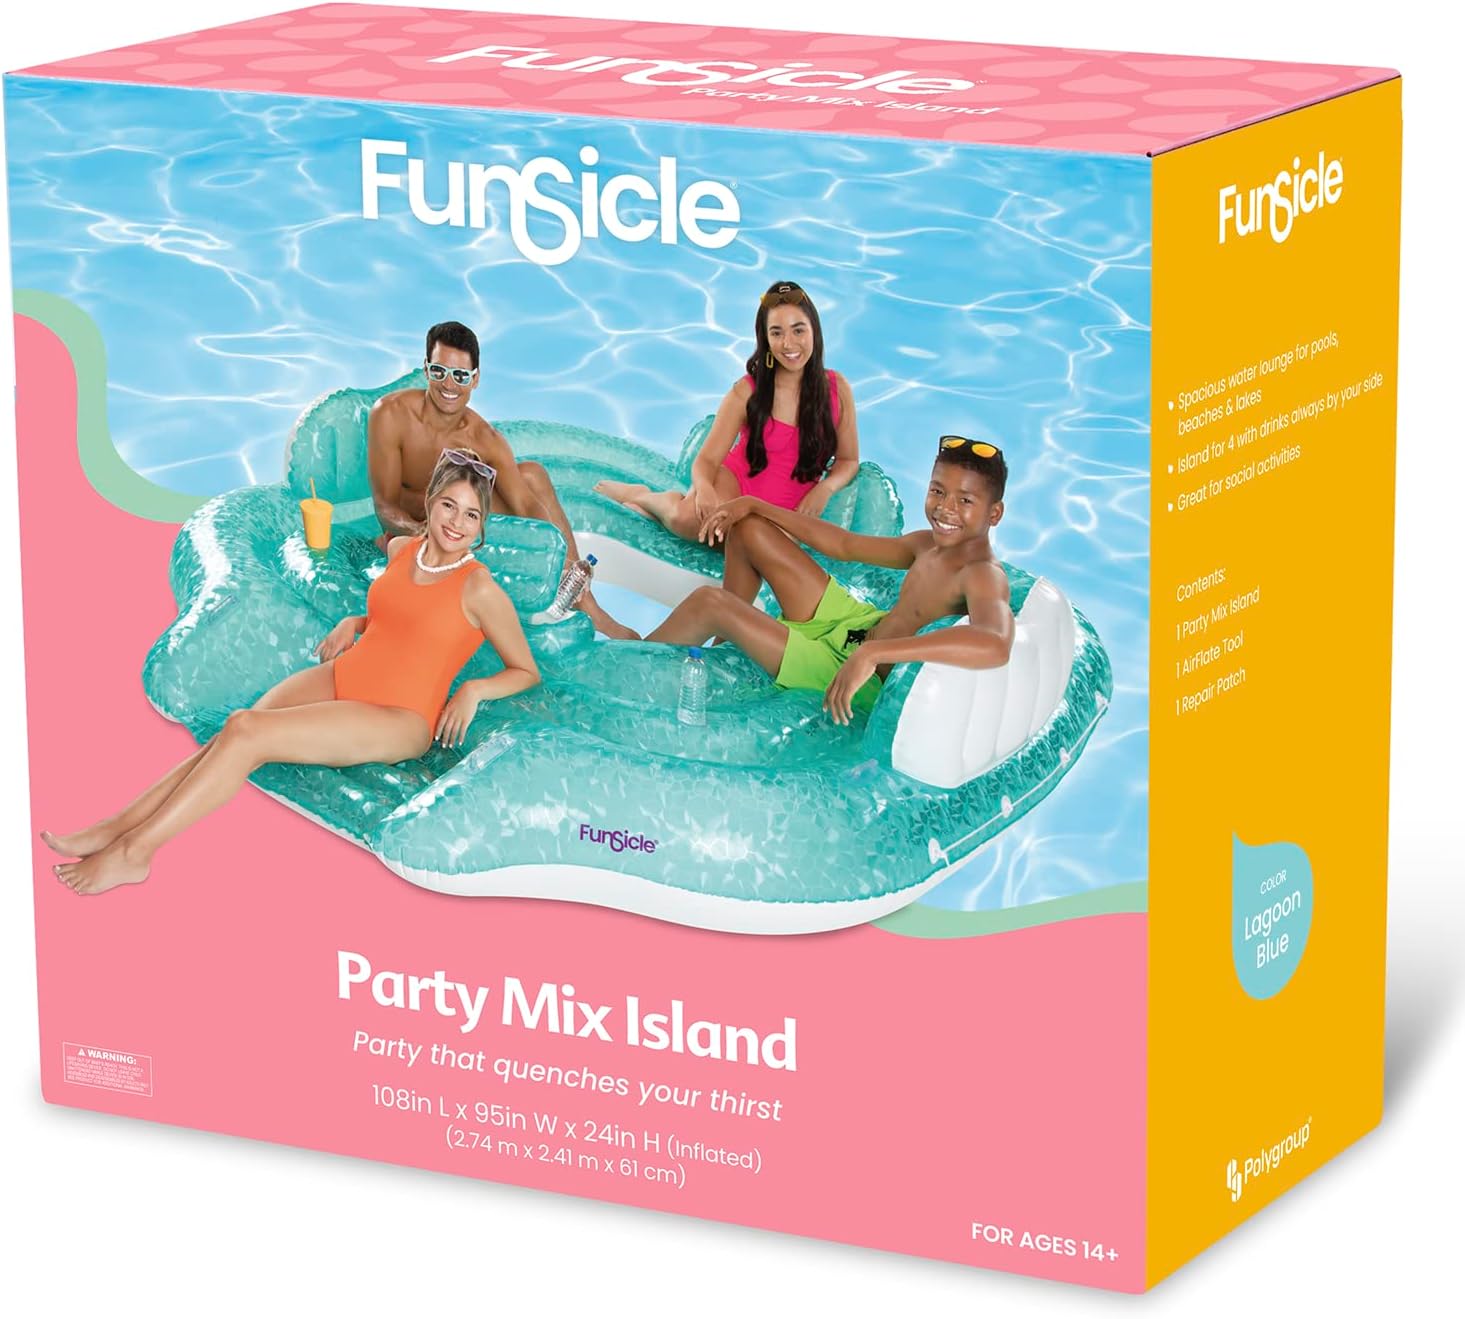 Funsicle 9 ft Party Mix Inflatable Island Float, Adult-Sized Review